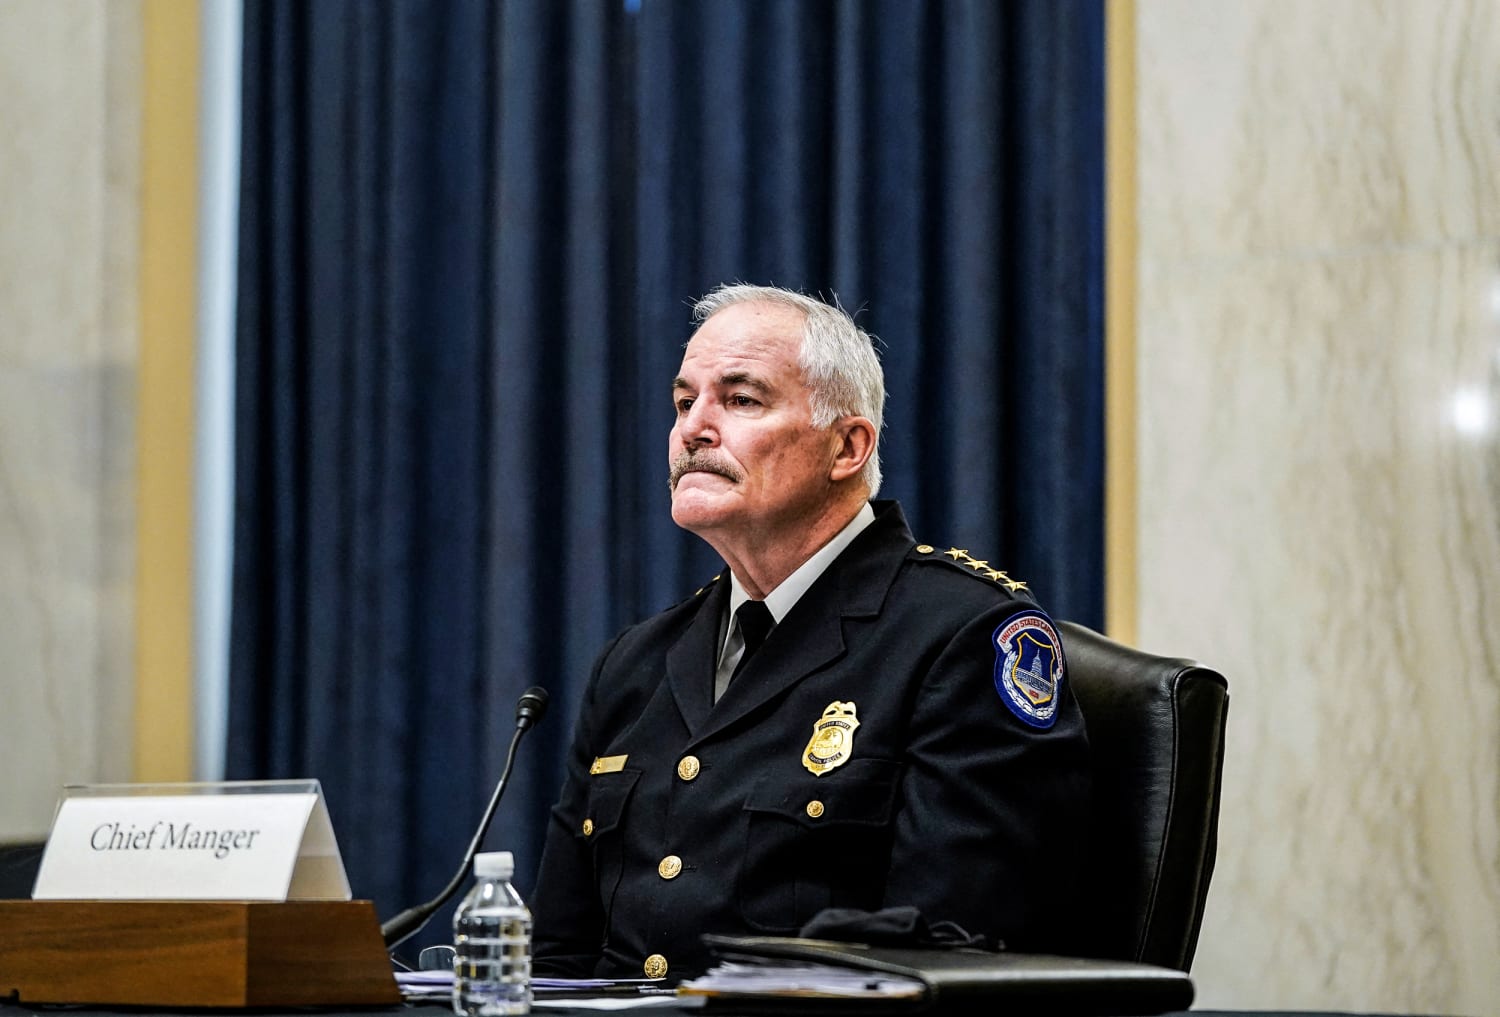 Capitol Police chief tells Congress of ‘significant improvements’ since Jan. 6